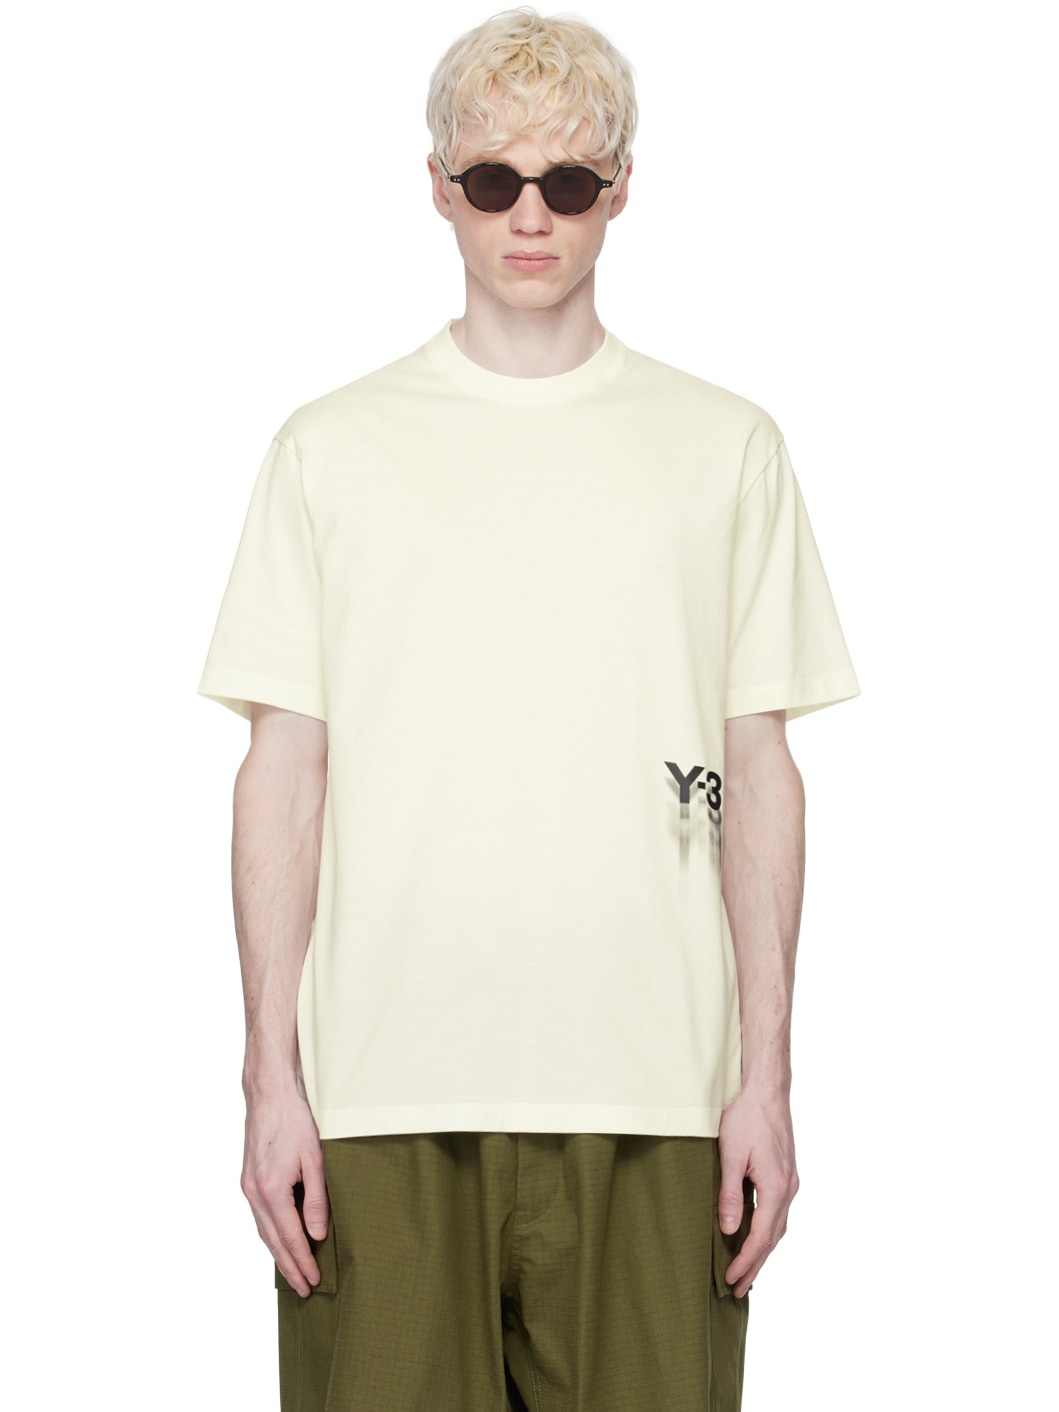 Off-White Graphic T-Shirt - 1